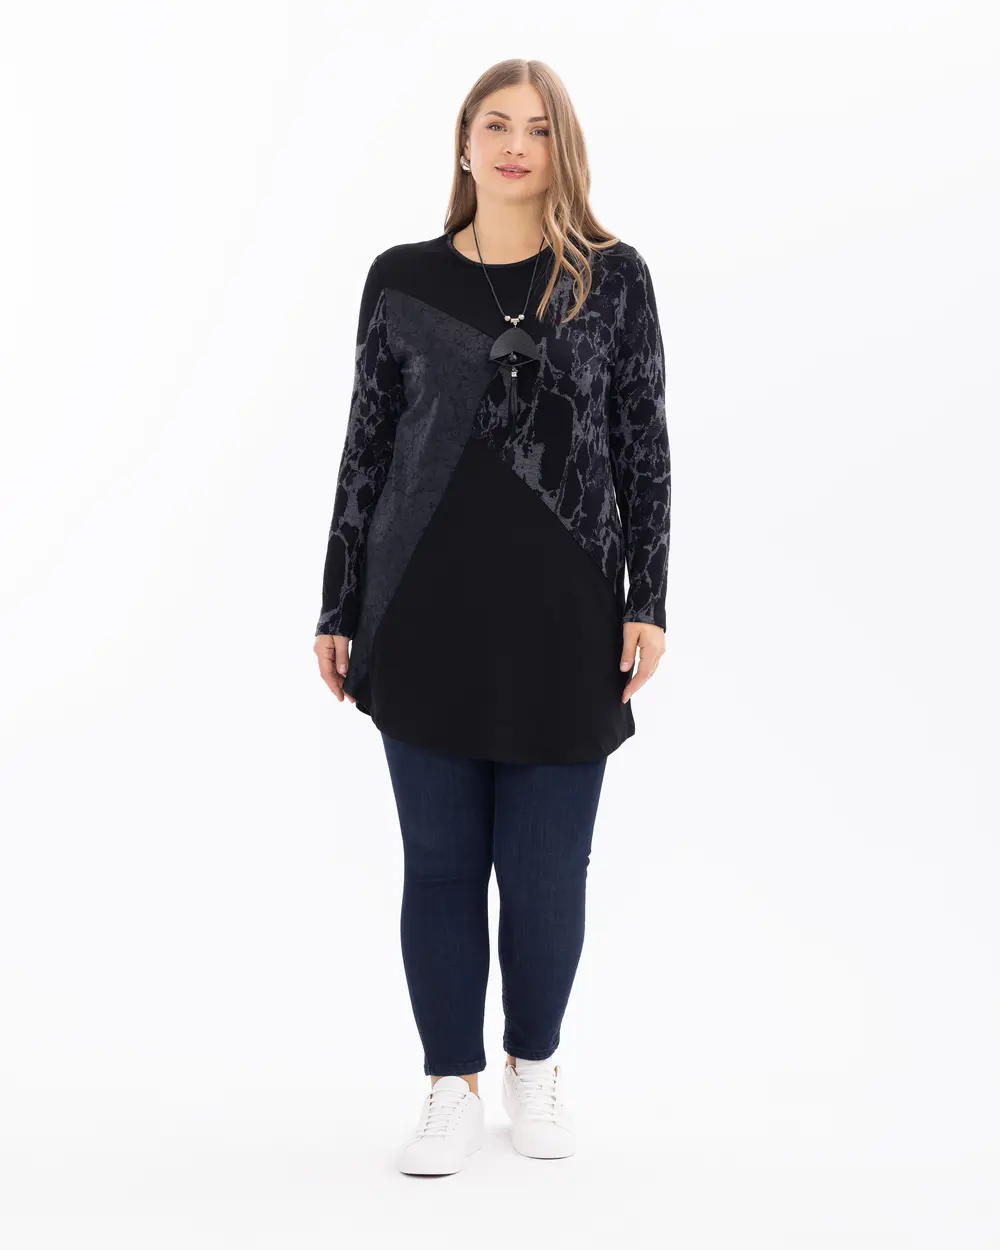 Plus Size Long Sleeve Tunic with Accessories